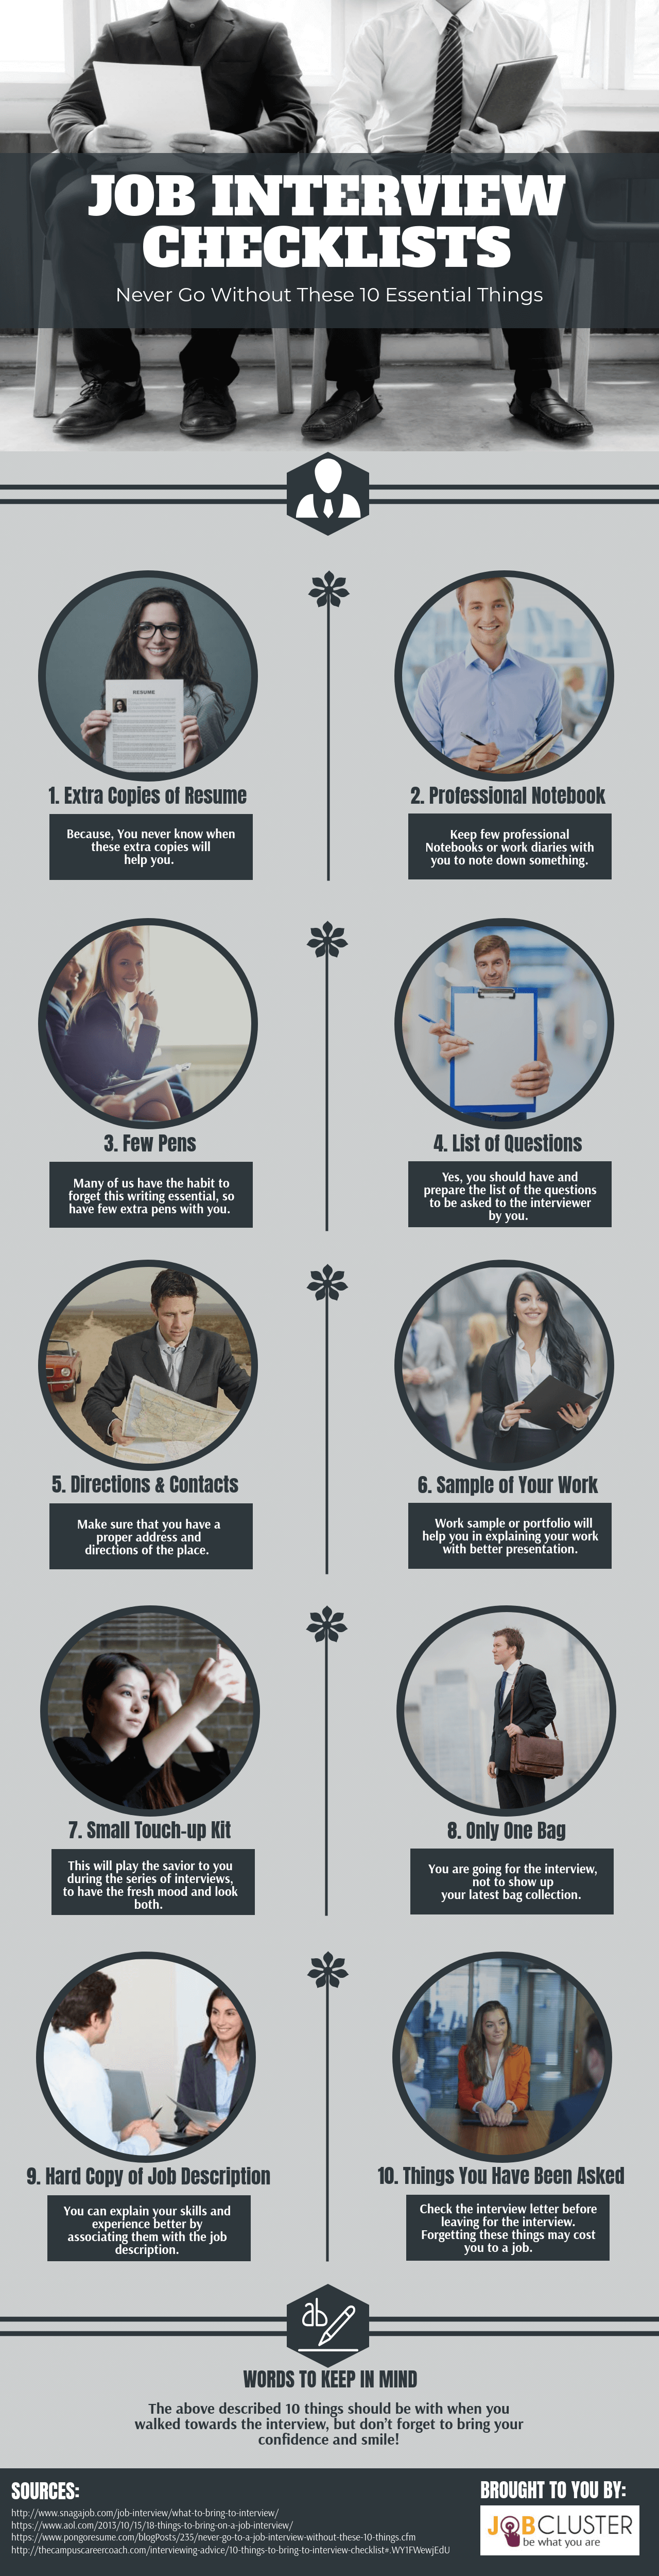 10 Important Things to Carry for the Job Interview